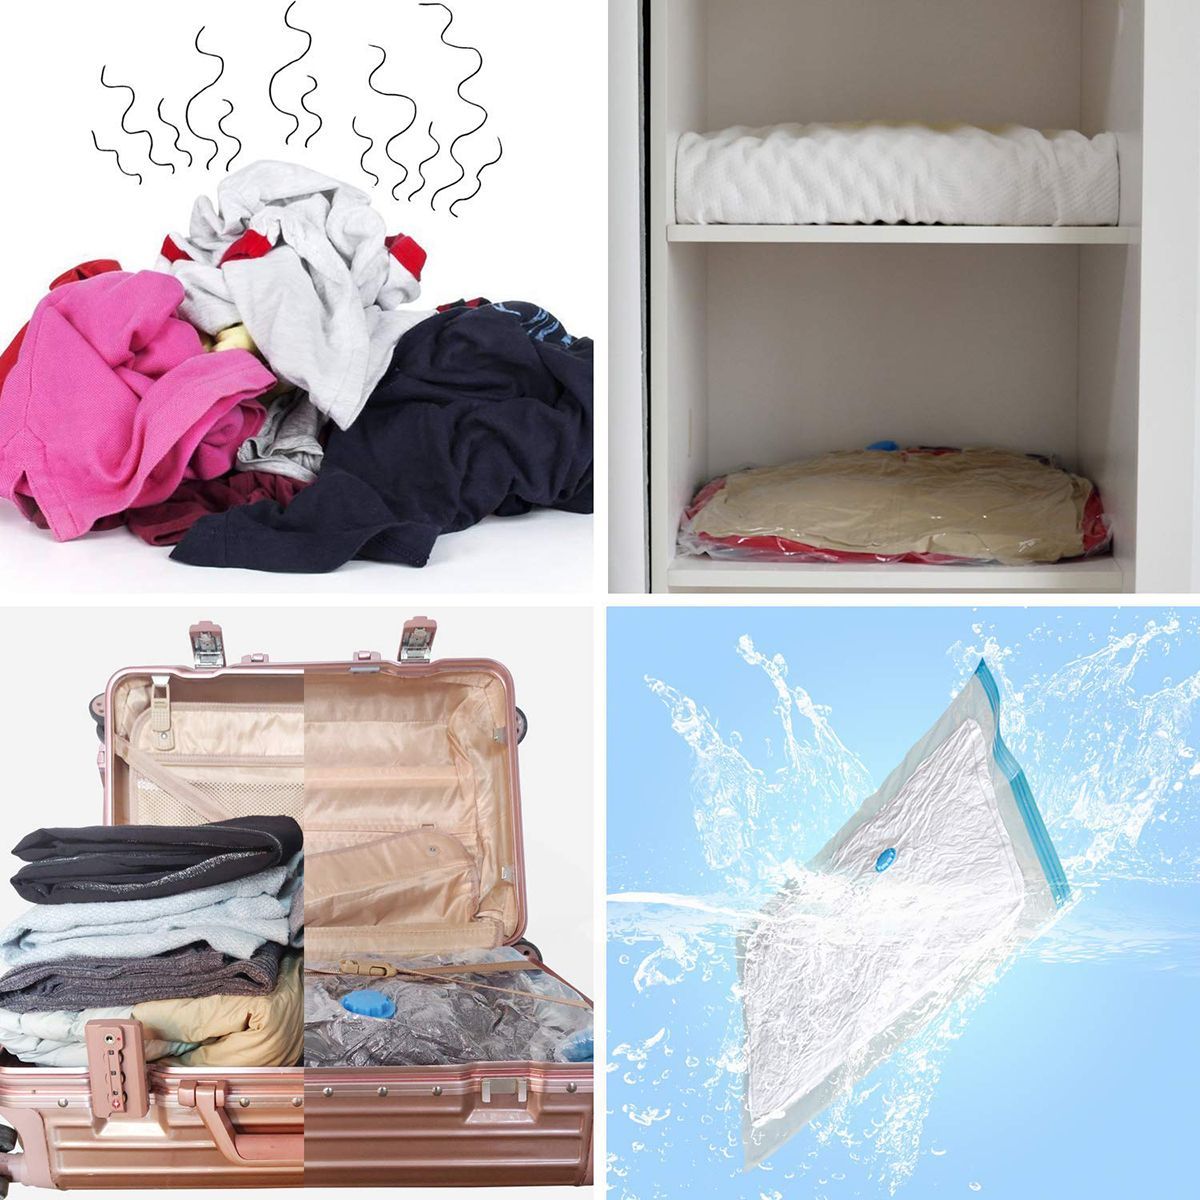 11Pcs-Travel-Vacuum-Storage-Bags-Space-Saver-Bag-for-Clothes-Comforters-Blankets-Mattress-Pillows-Wi-1561559